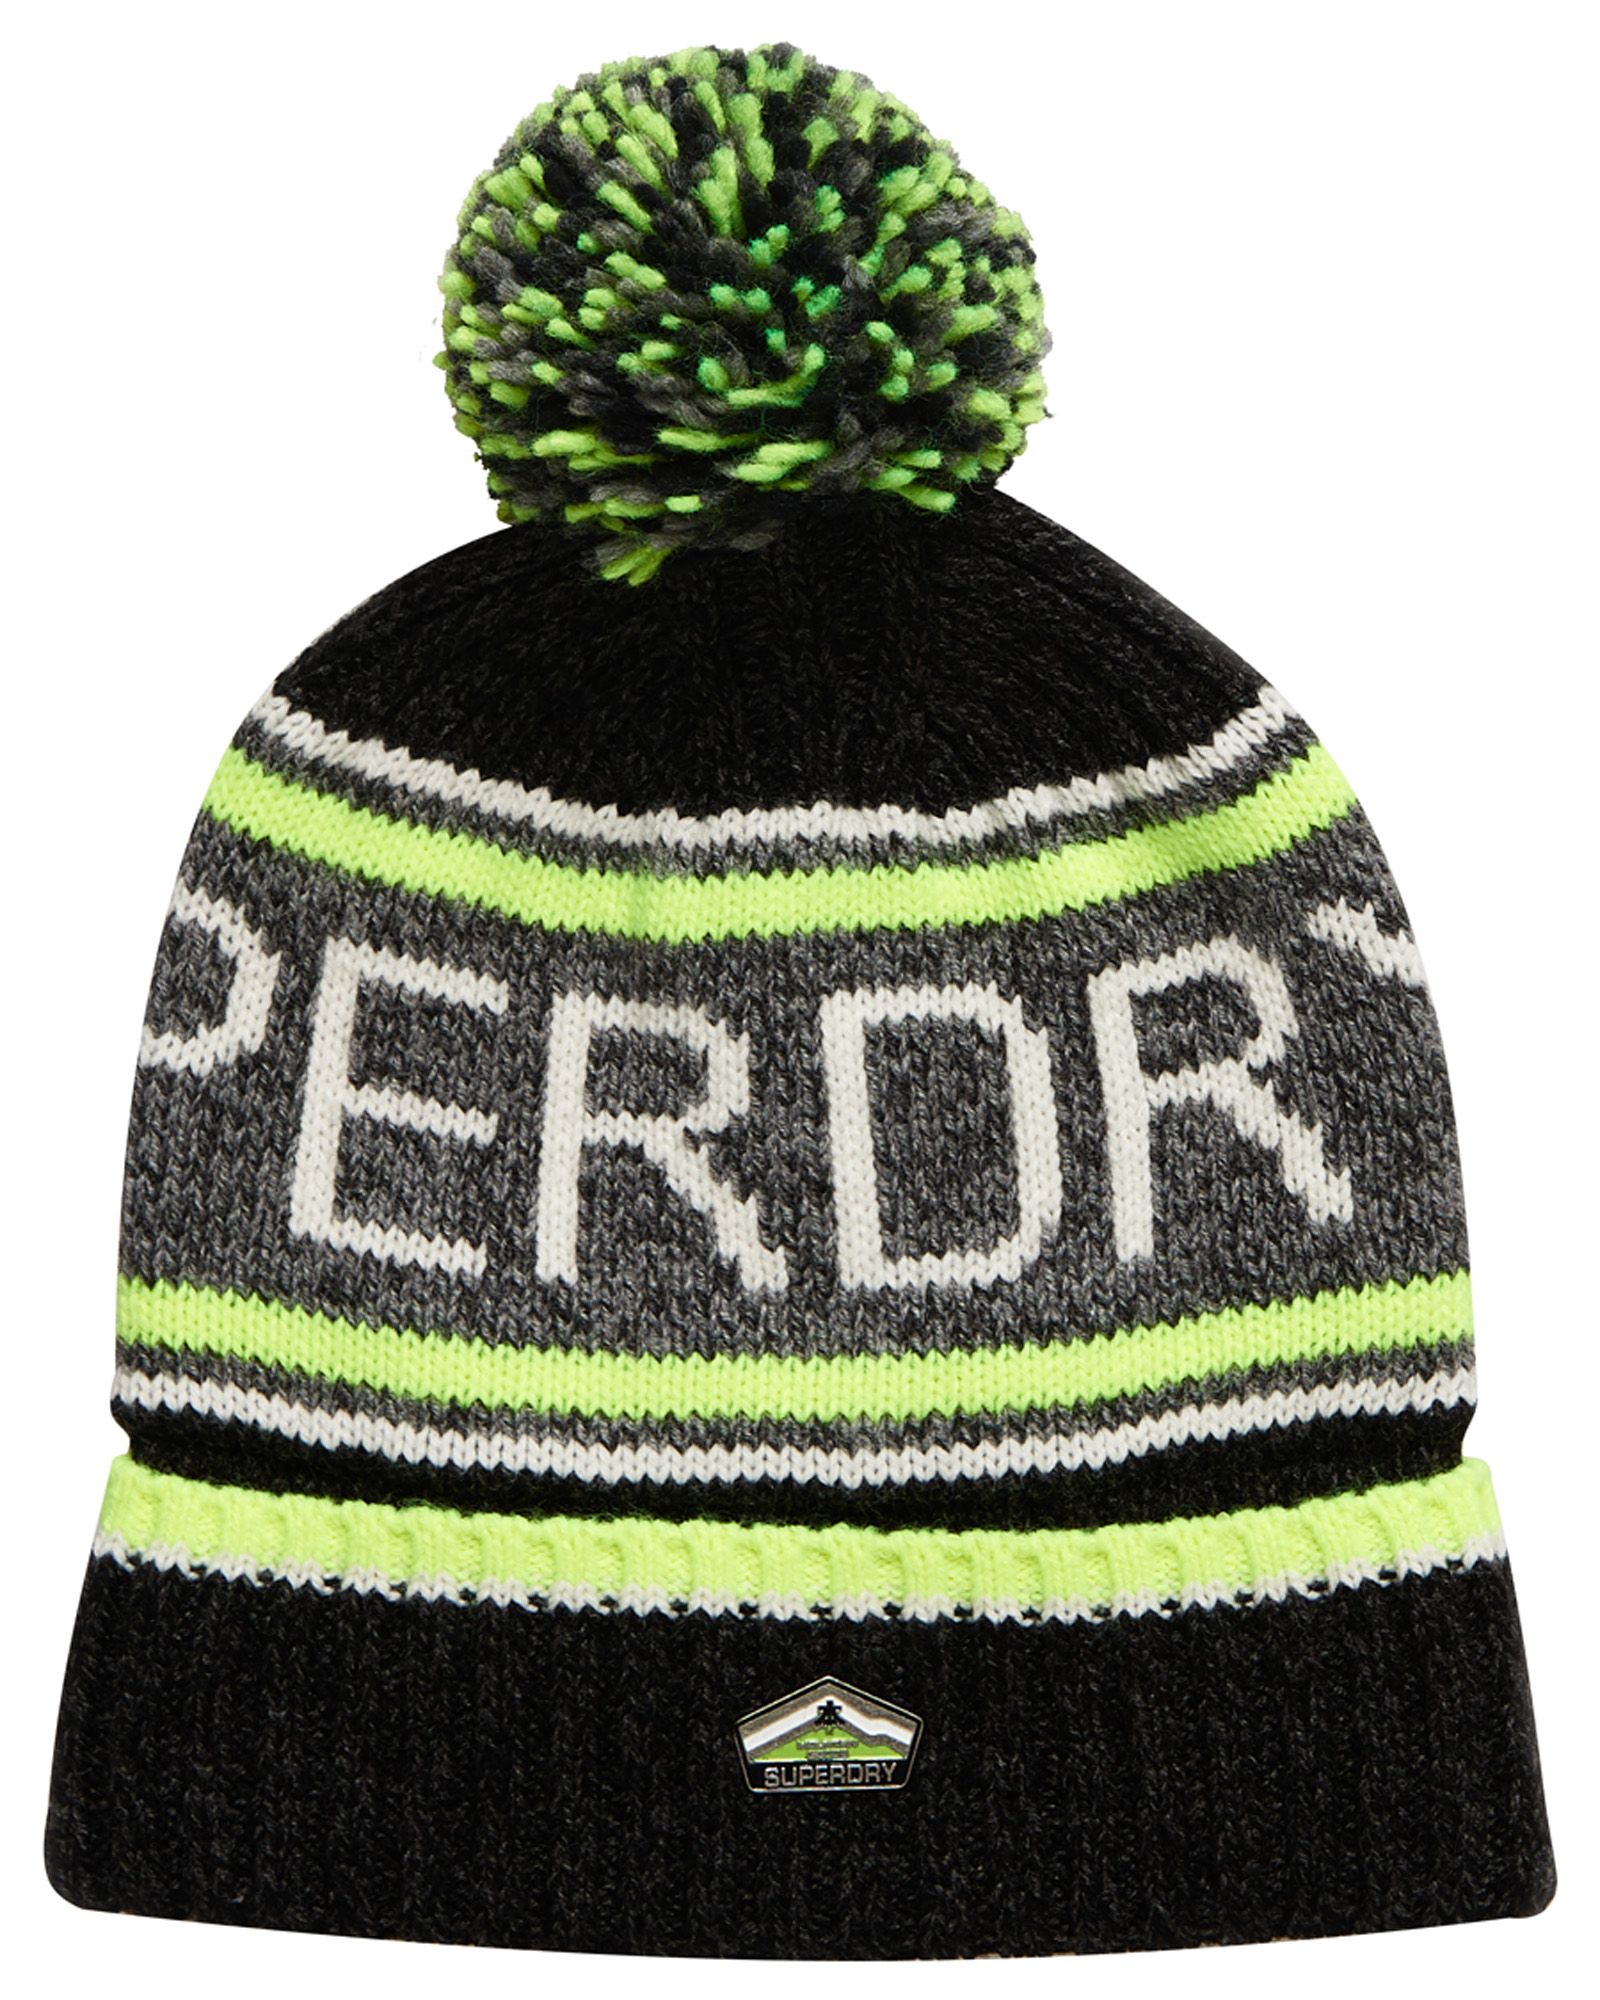 Superdry men's Superdry Logo beanie. Featuring a bobble top, metal Superdry badge and branding. This turn up beanie is perfect for the colder weather.